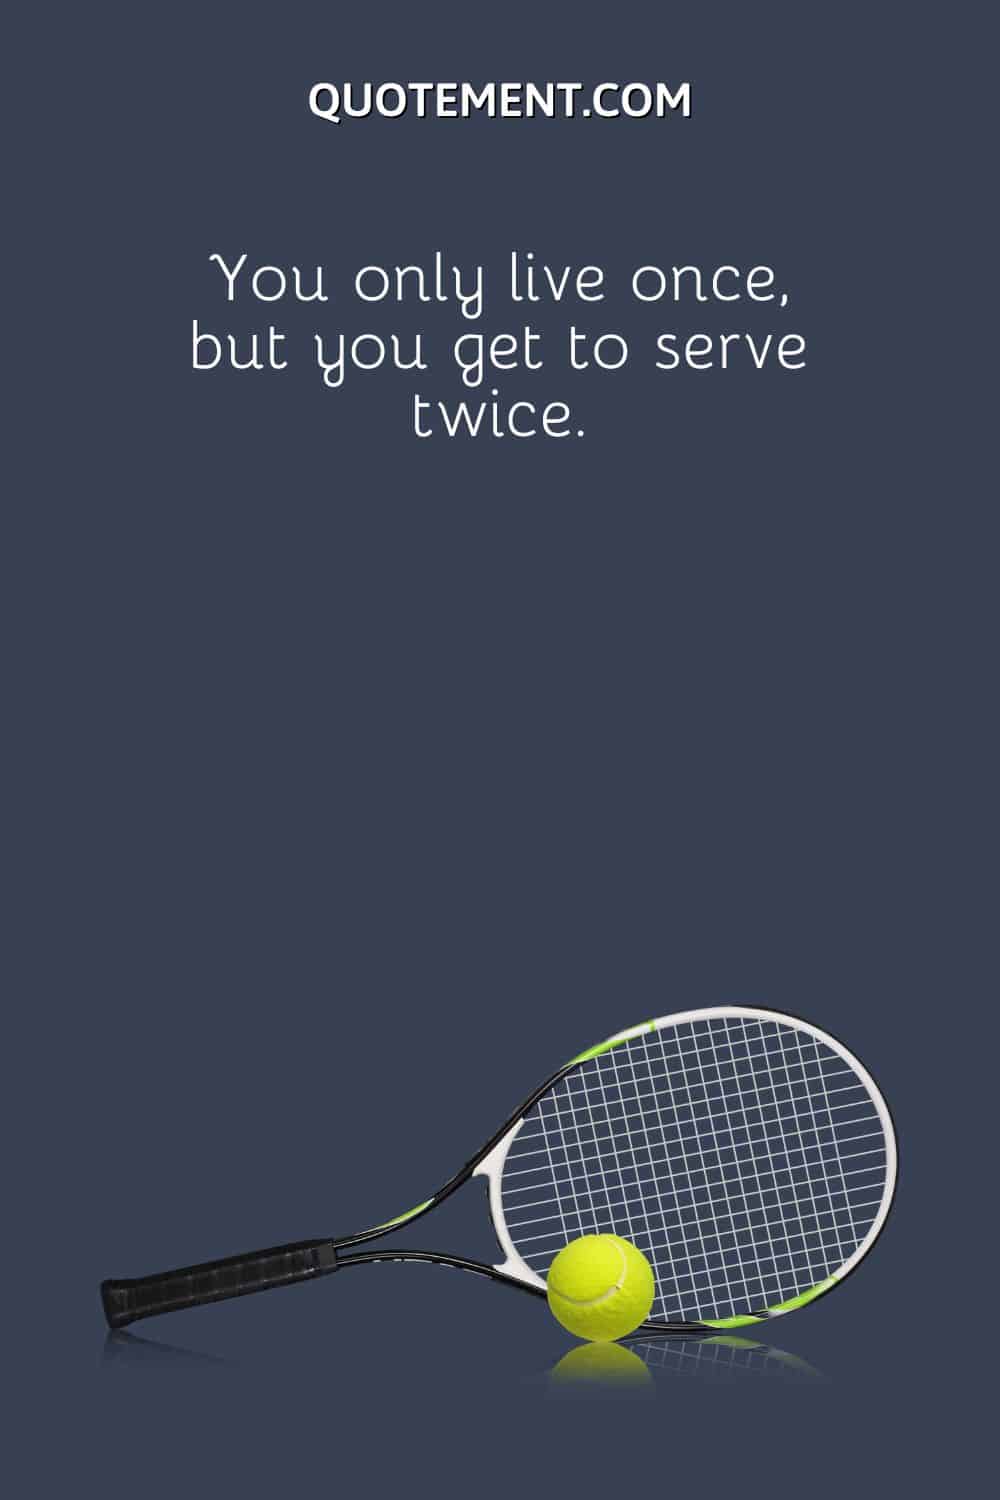 You only live once, but you get to serve twice.